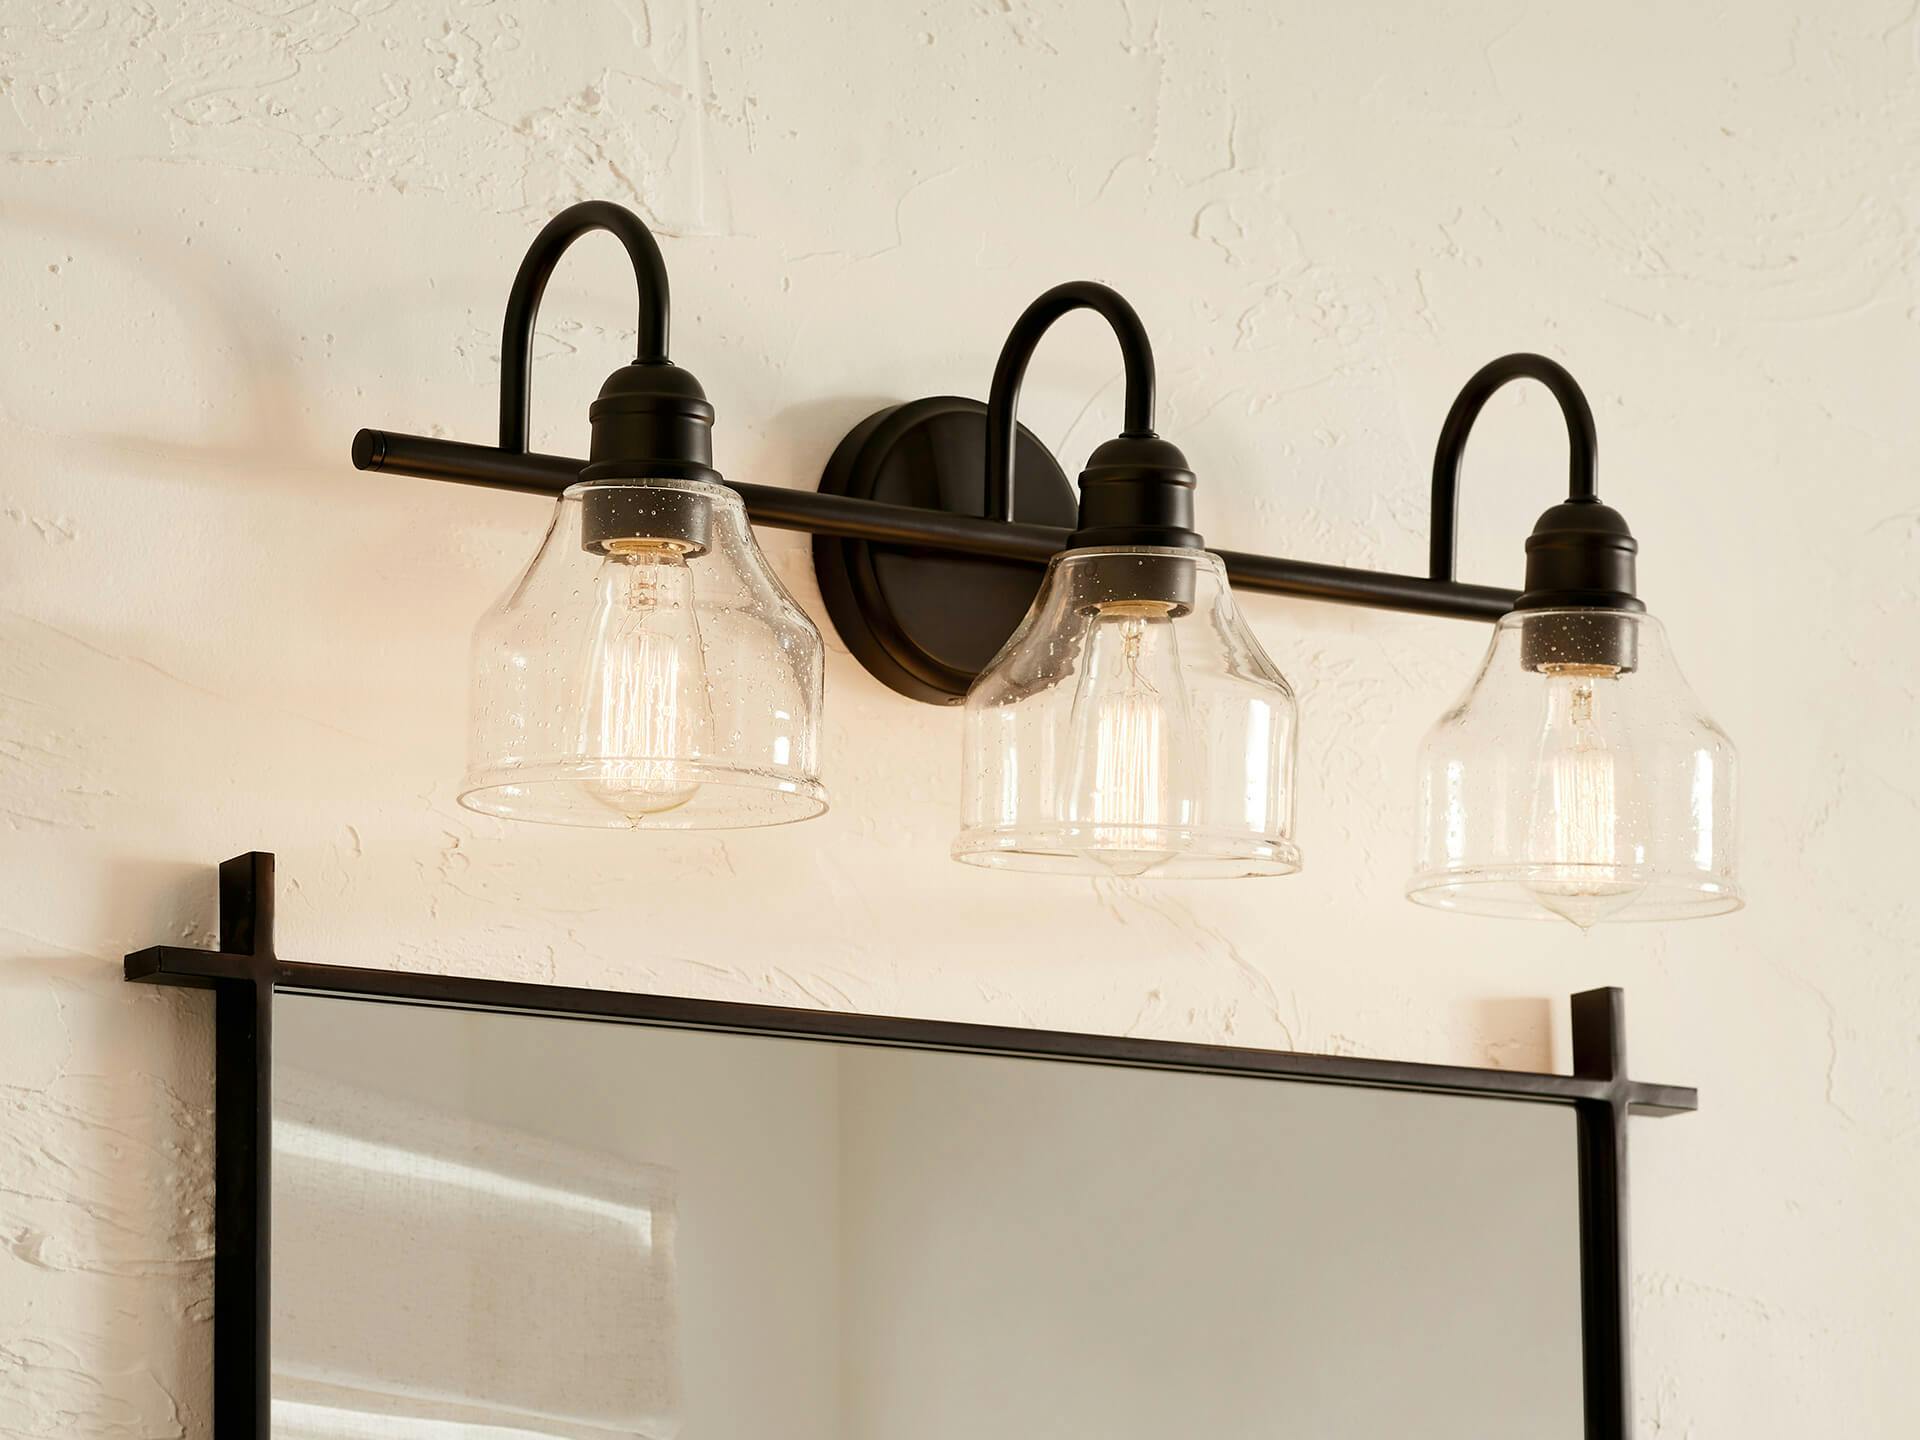 A close up of an Avery three bulb vanity light with black finish above a mirror